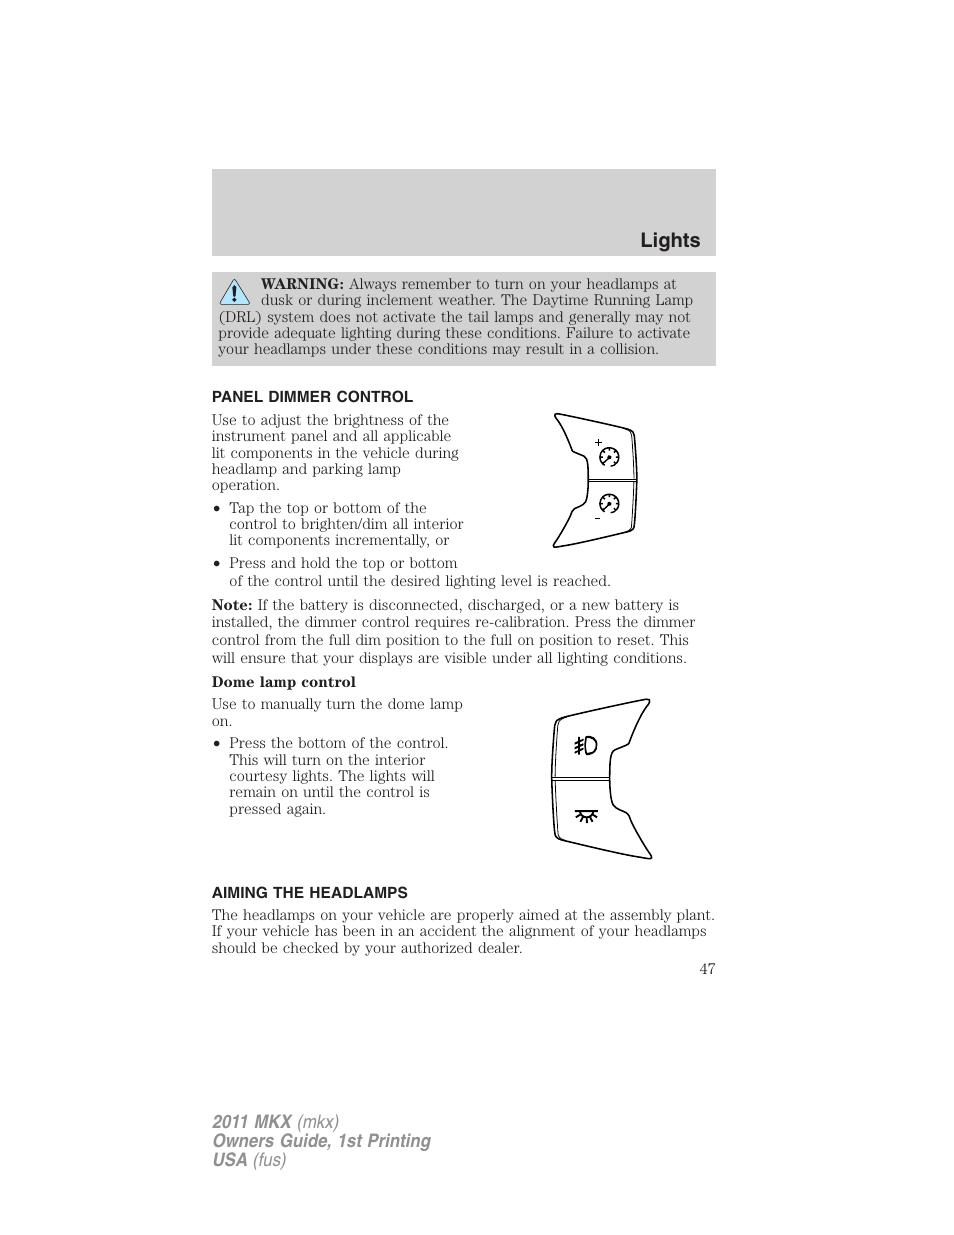 Panel dimmer control, Aiming the headlamps, Lights | Lincoln 2011 MKX User Manual | Page 47 / 367